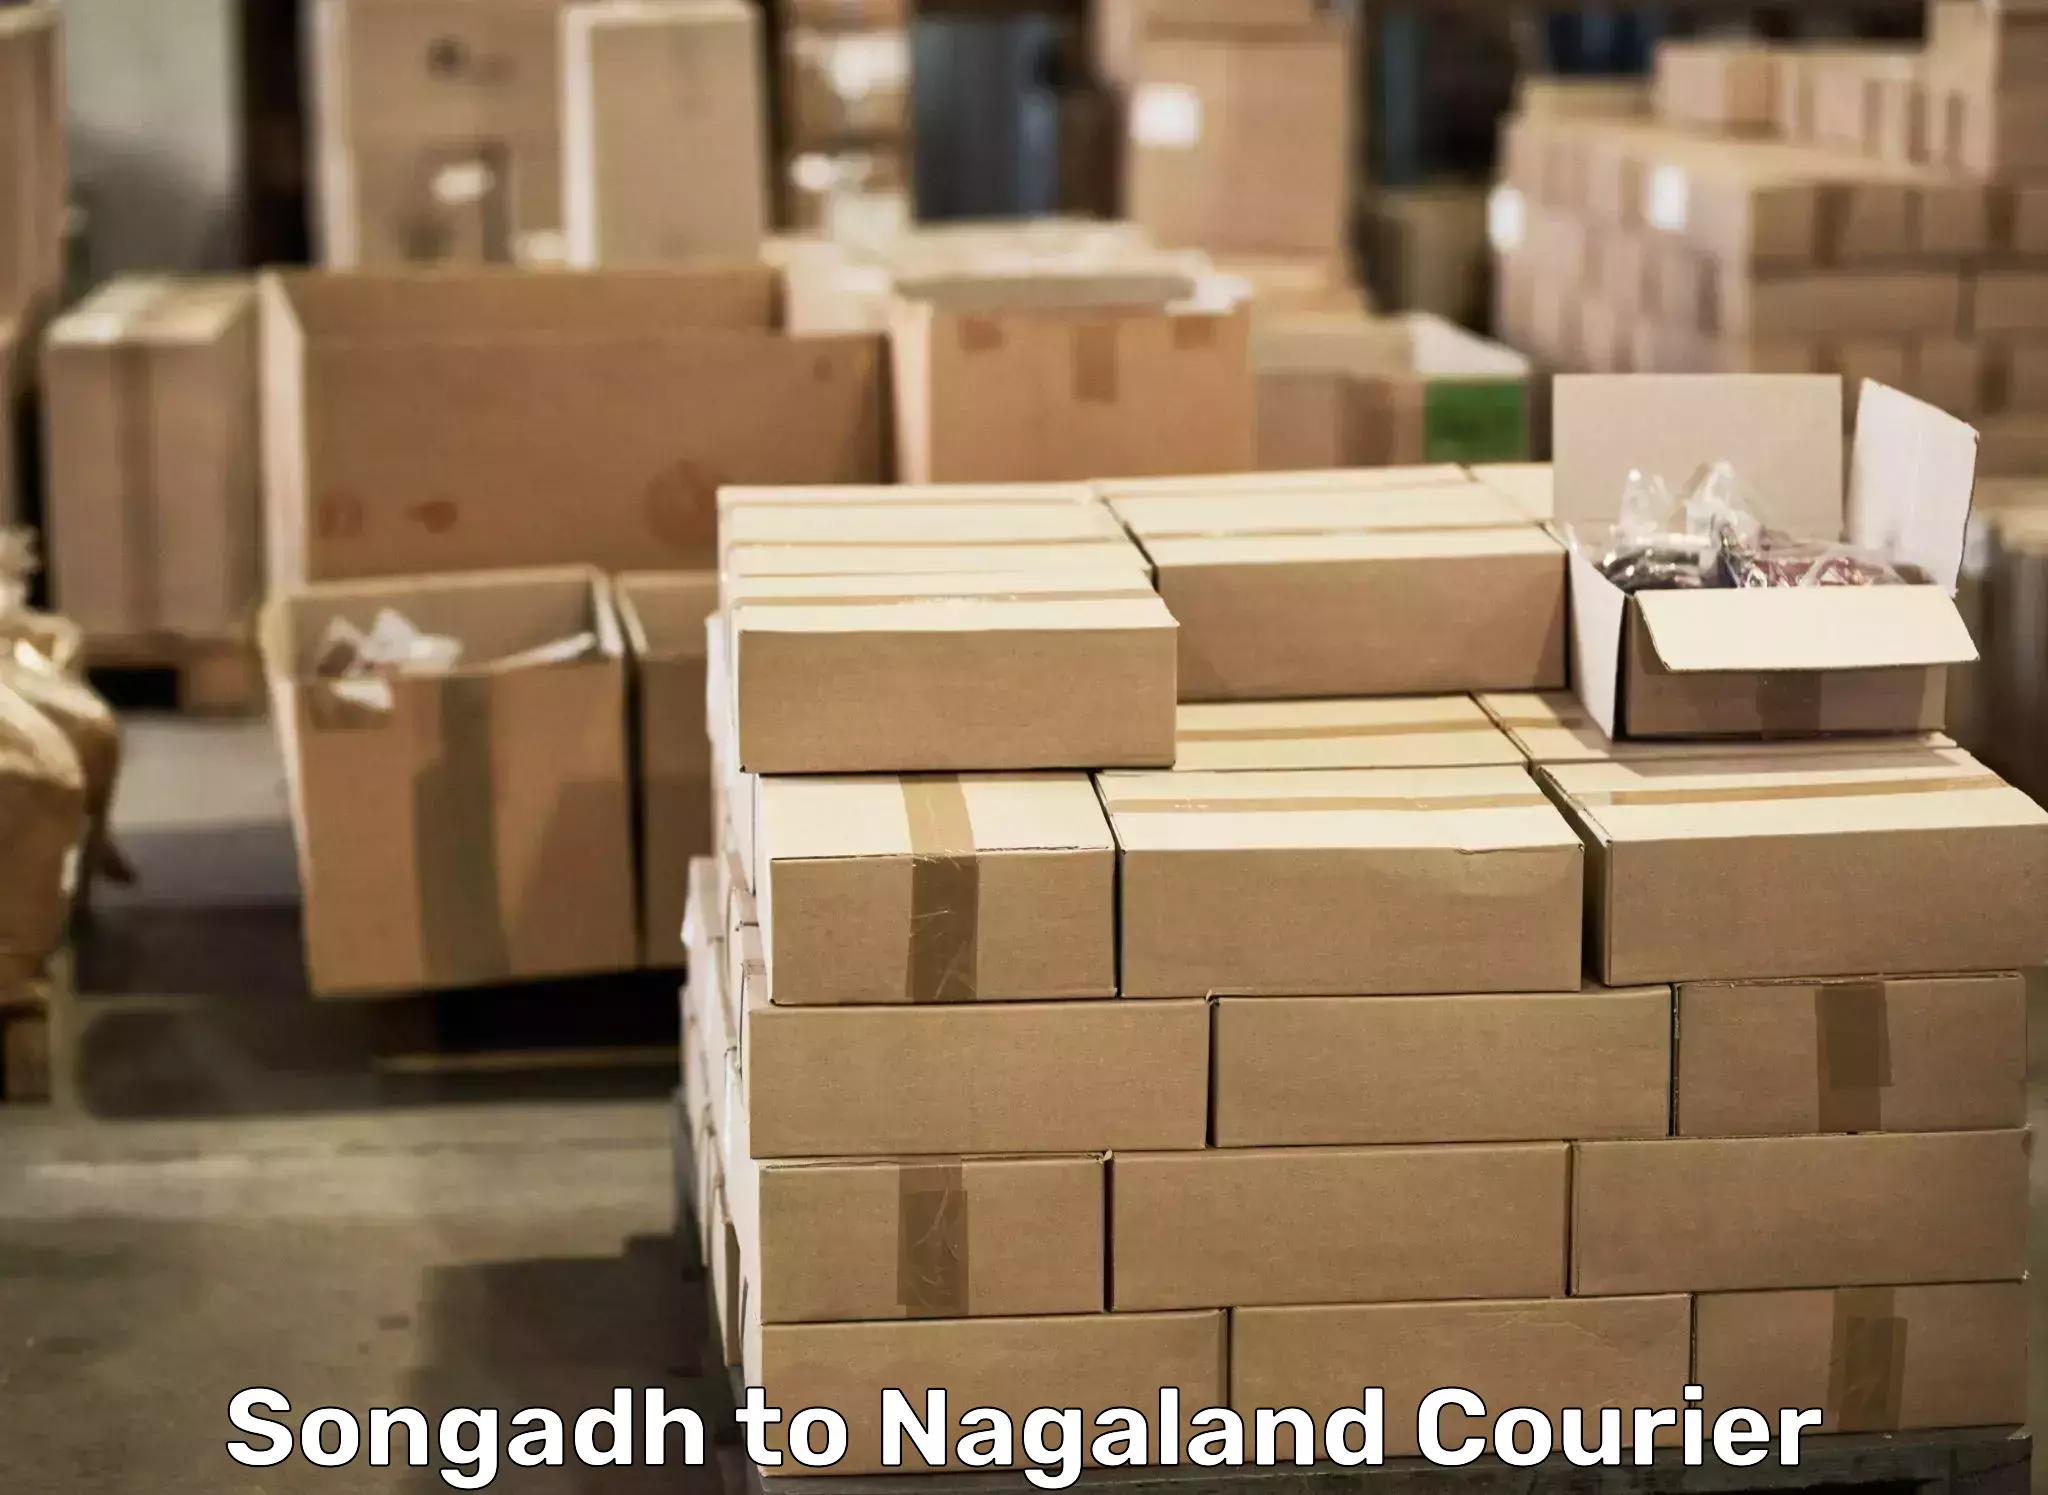 Furniture delivery service Songadh to Kohima